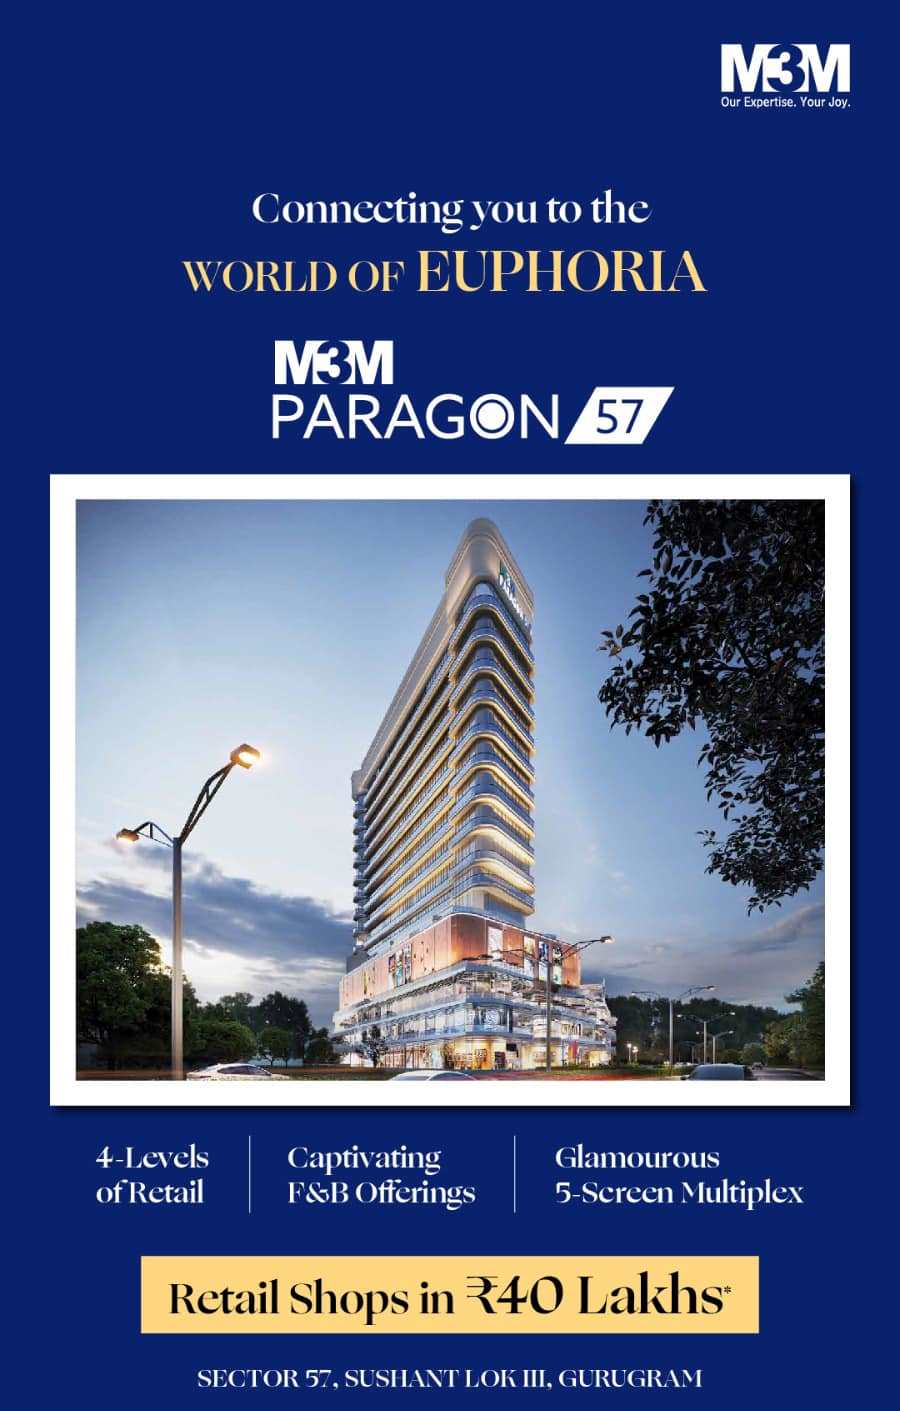 Get ready to discover a new world of entertainment at M3M Paragon in sector 57, Gurgaon Update